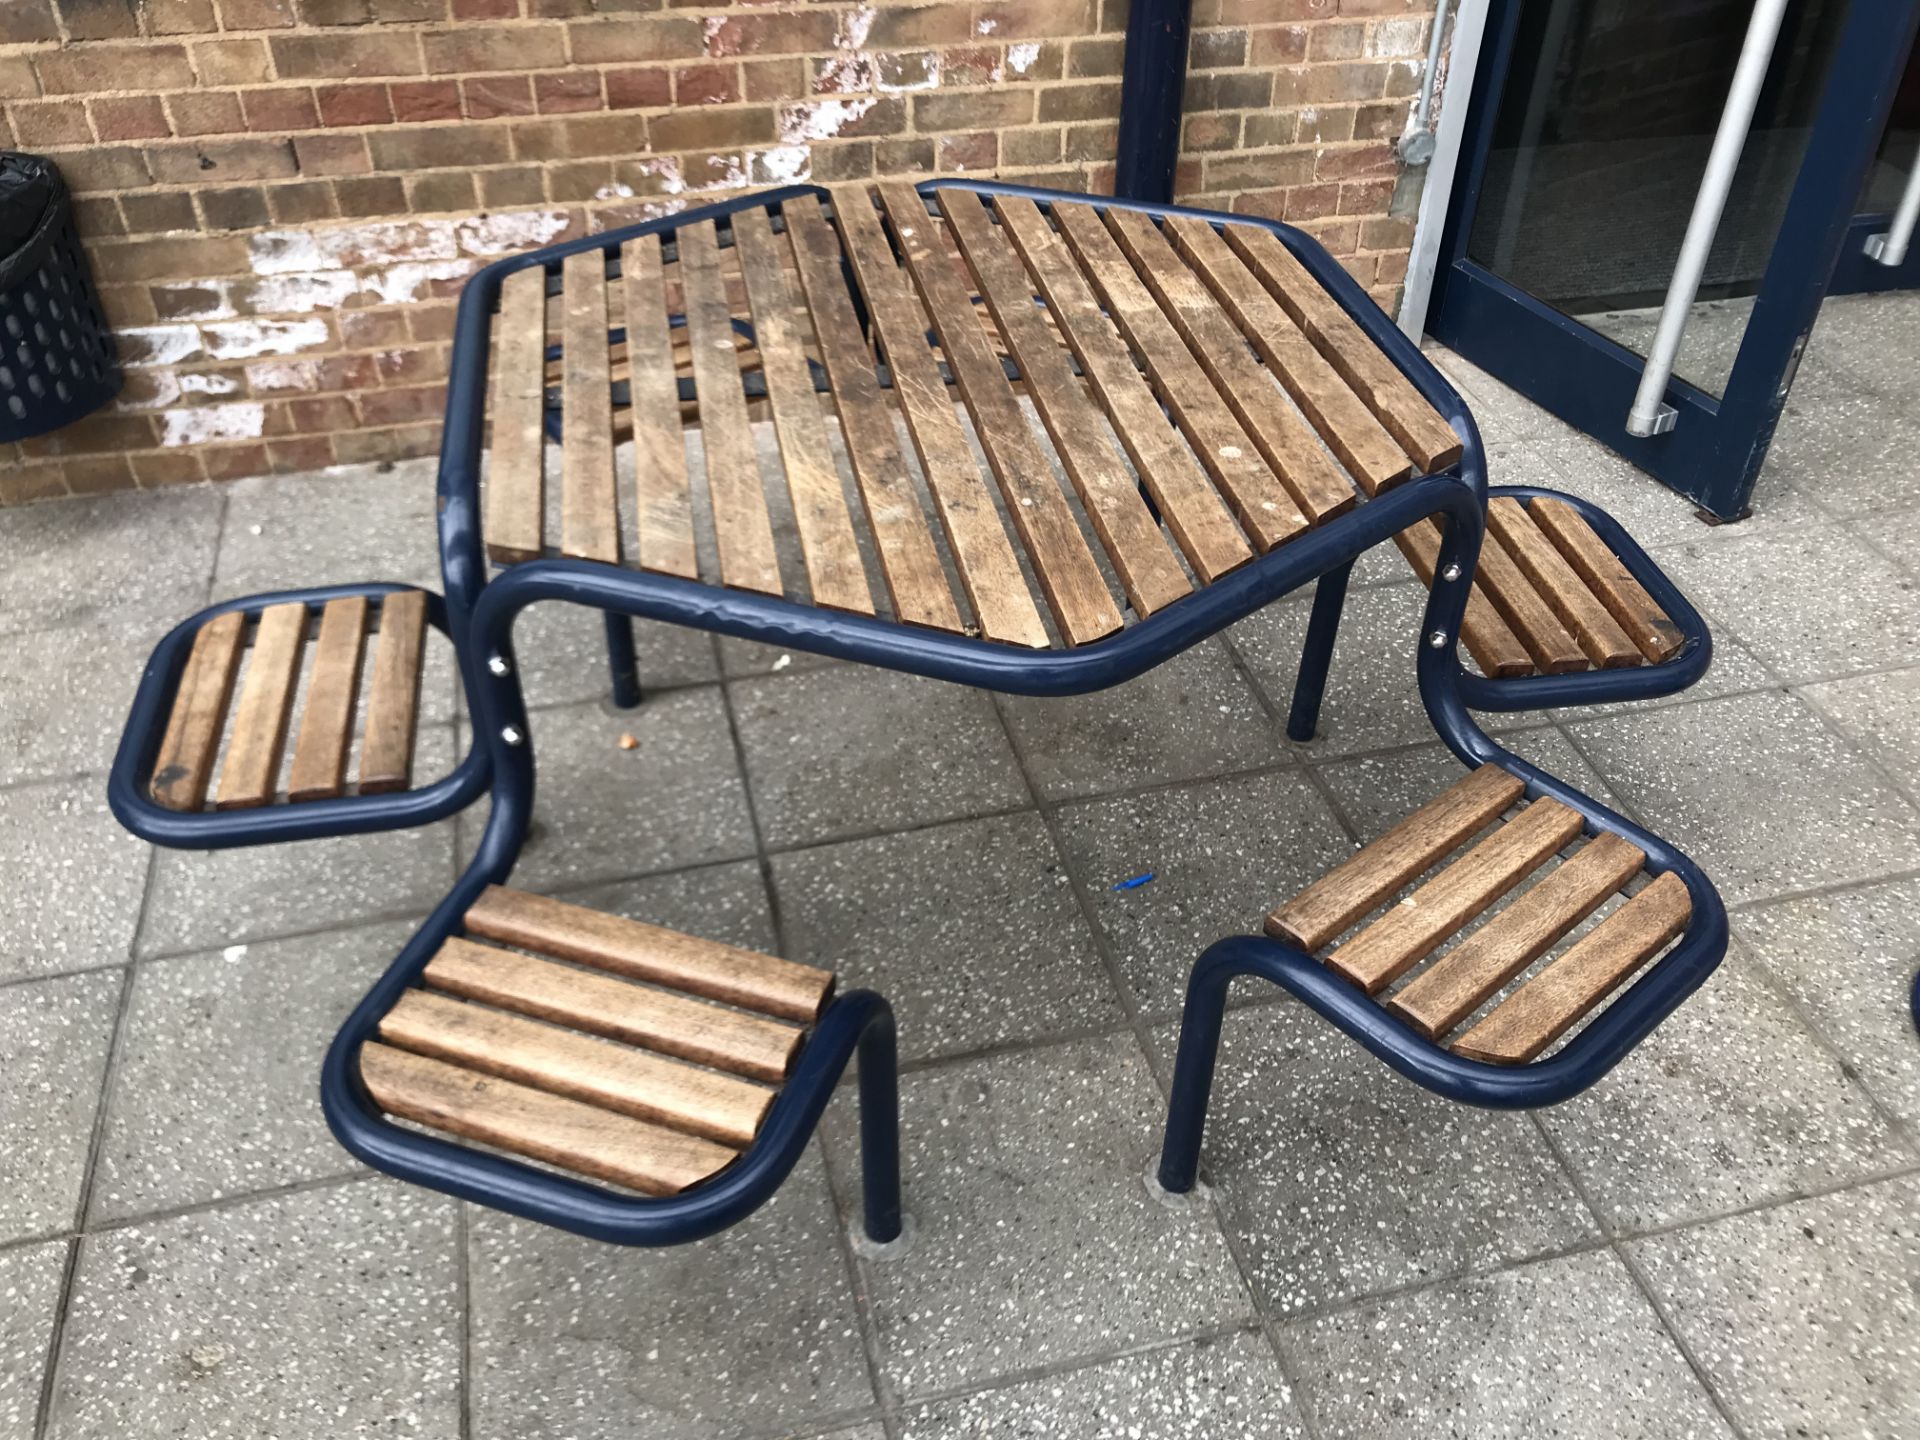 Outside Seating and Table x1